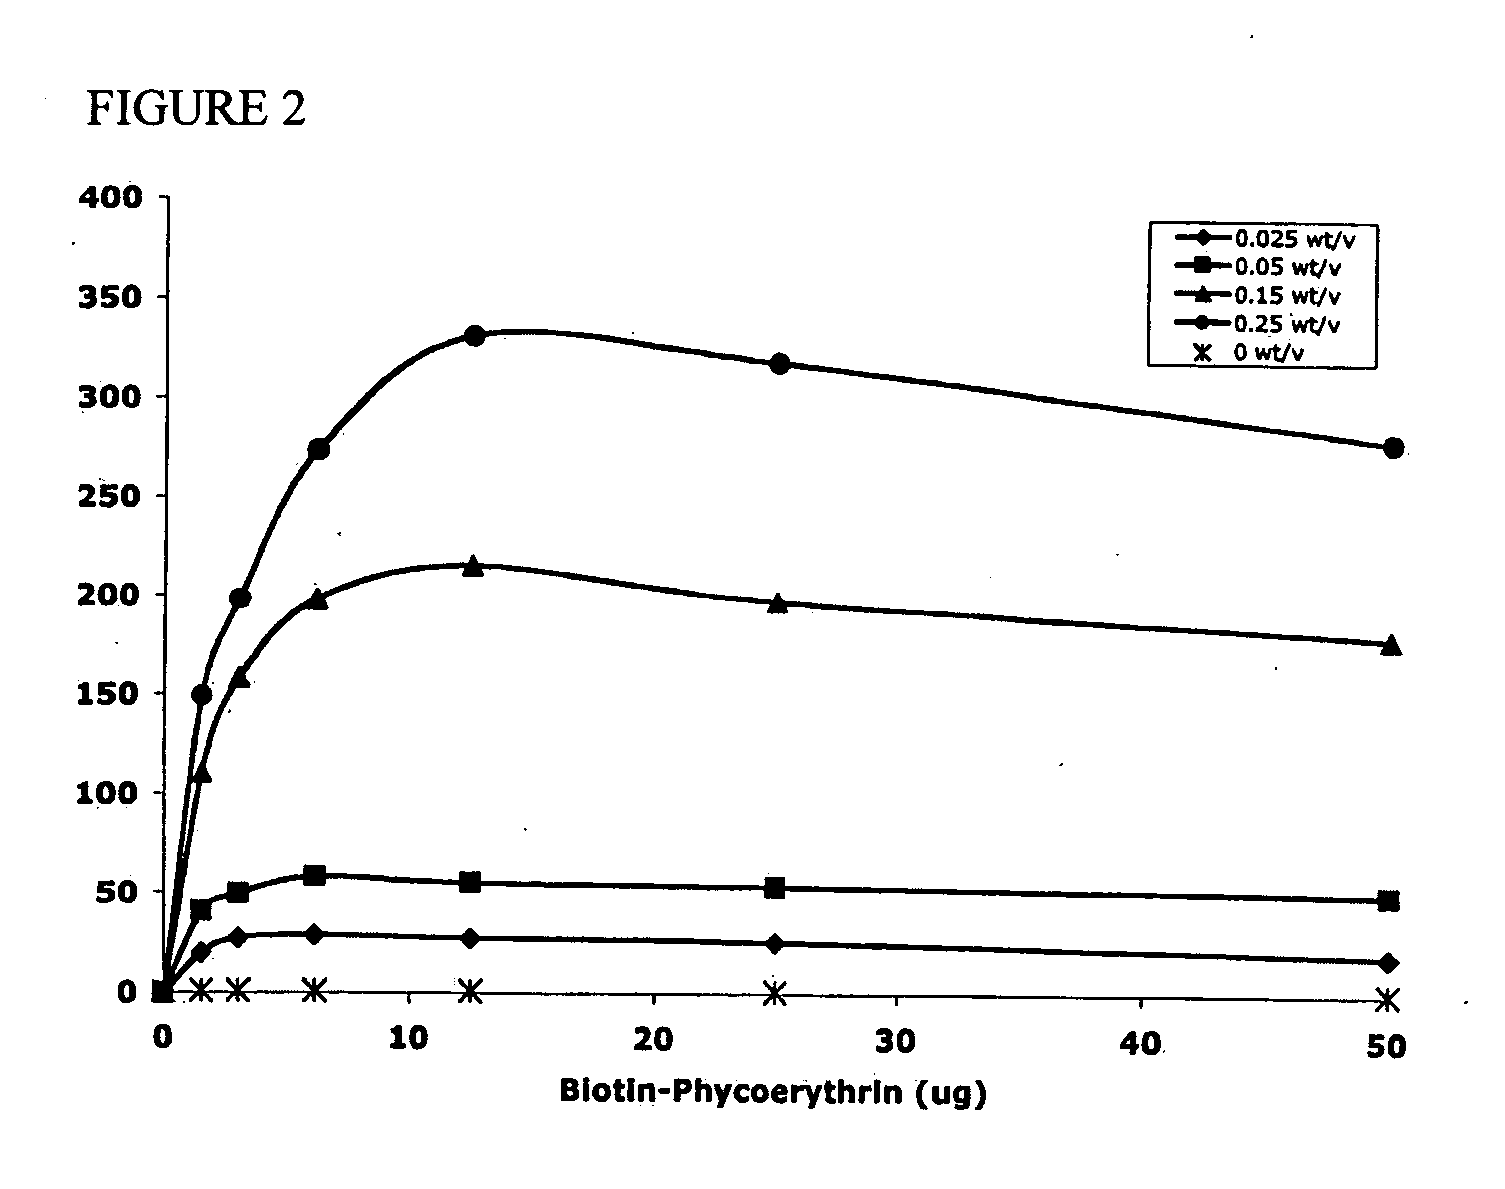 Methods of treatment with drug loaded polymeric materials